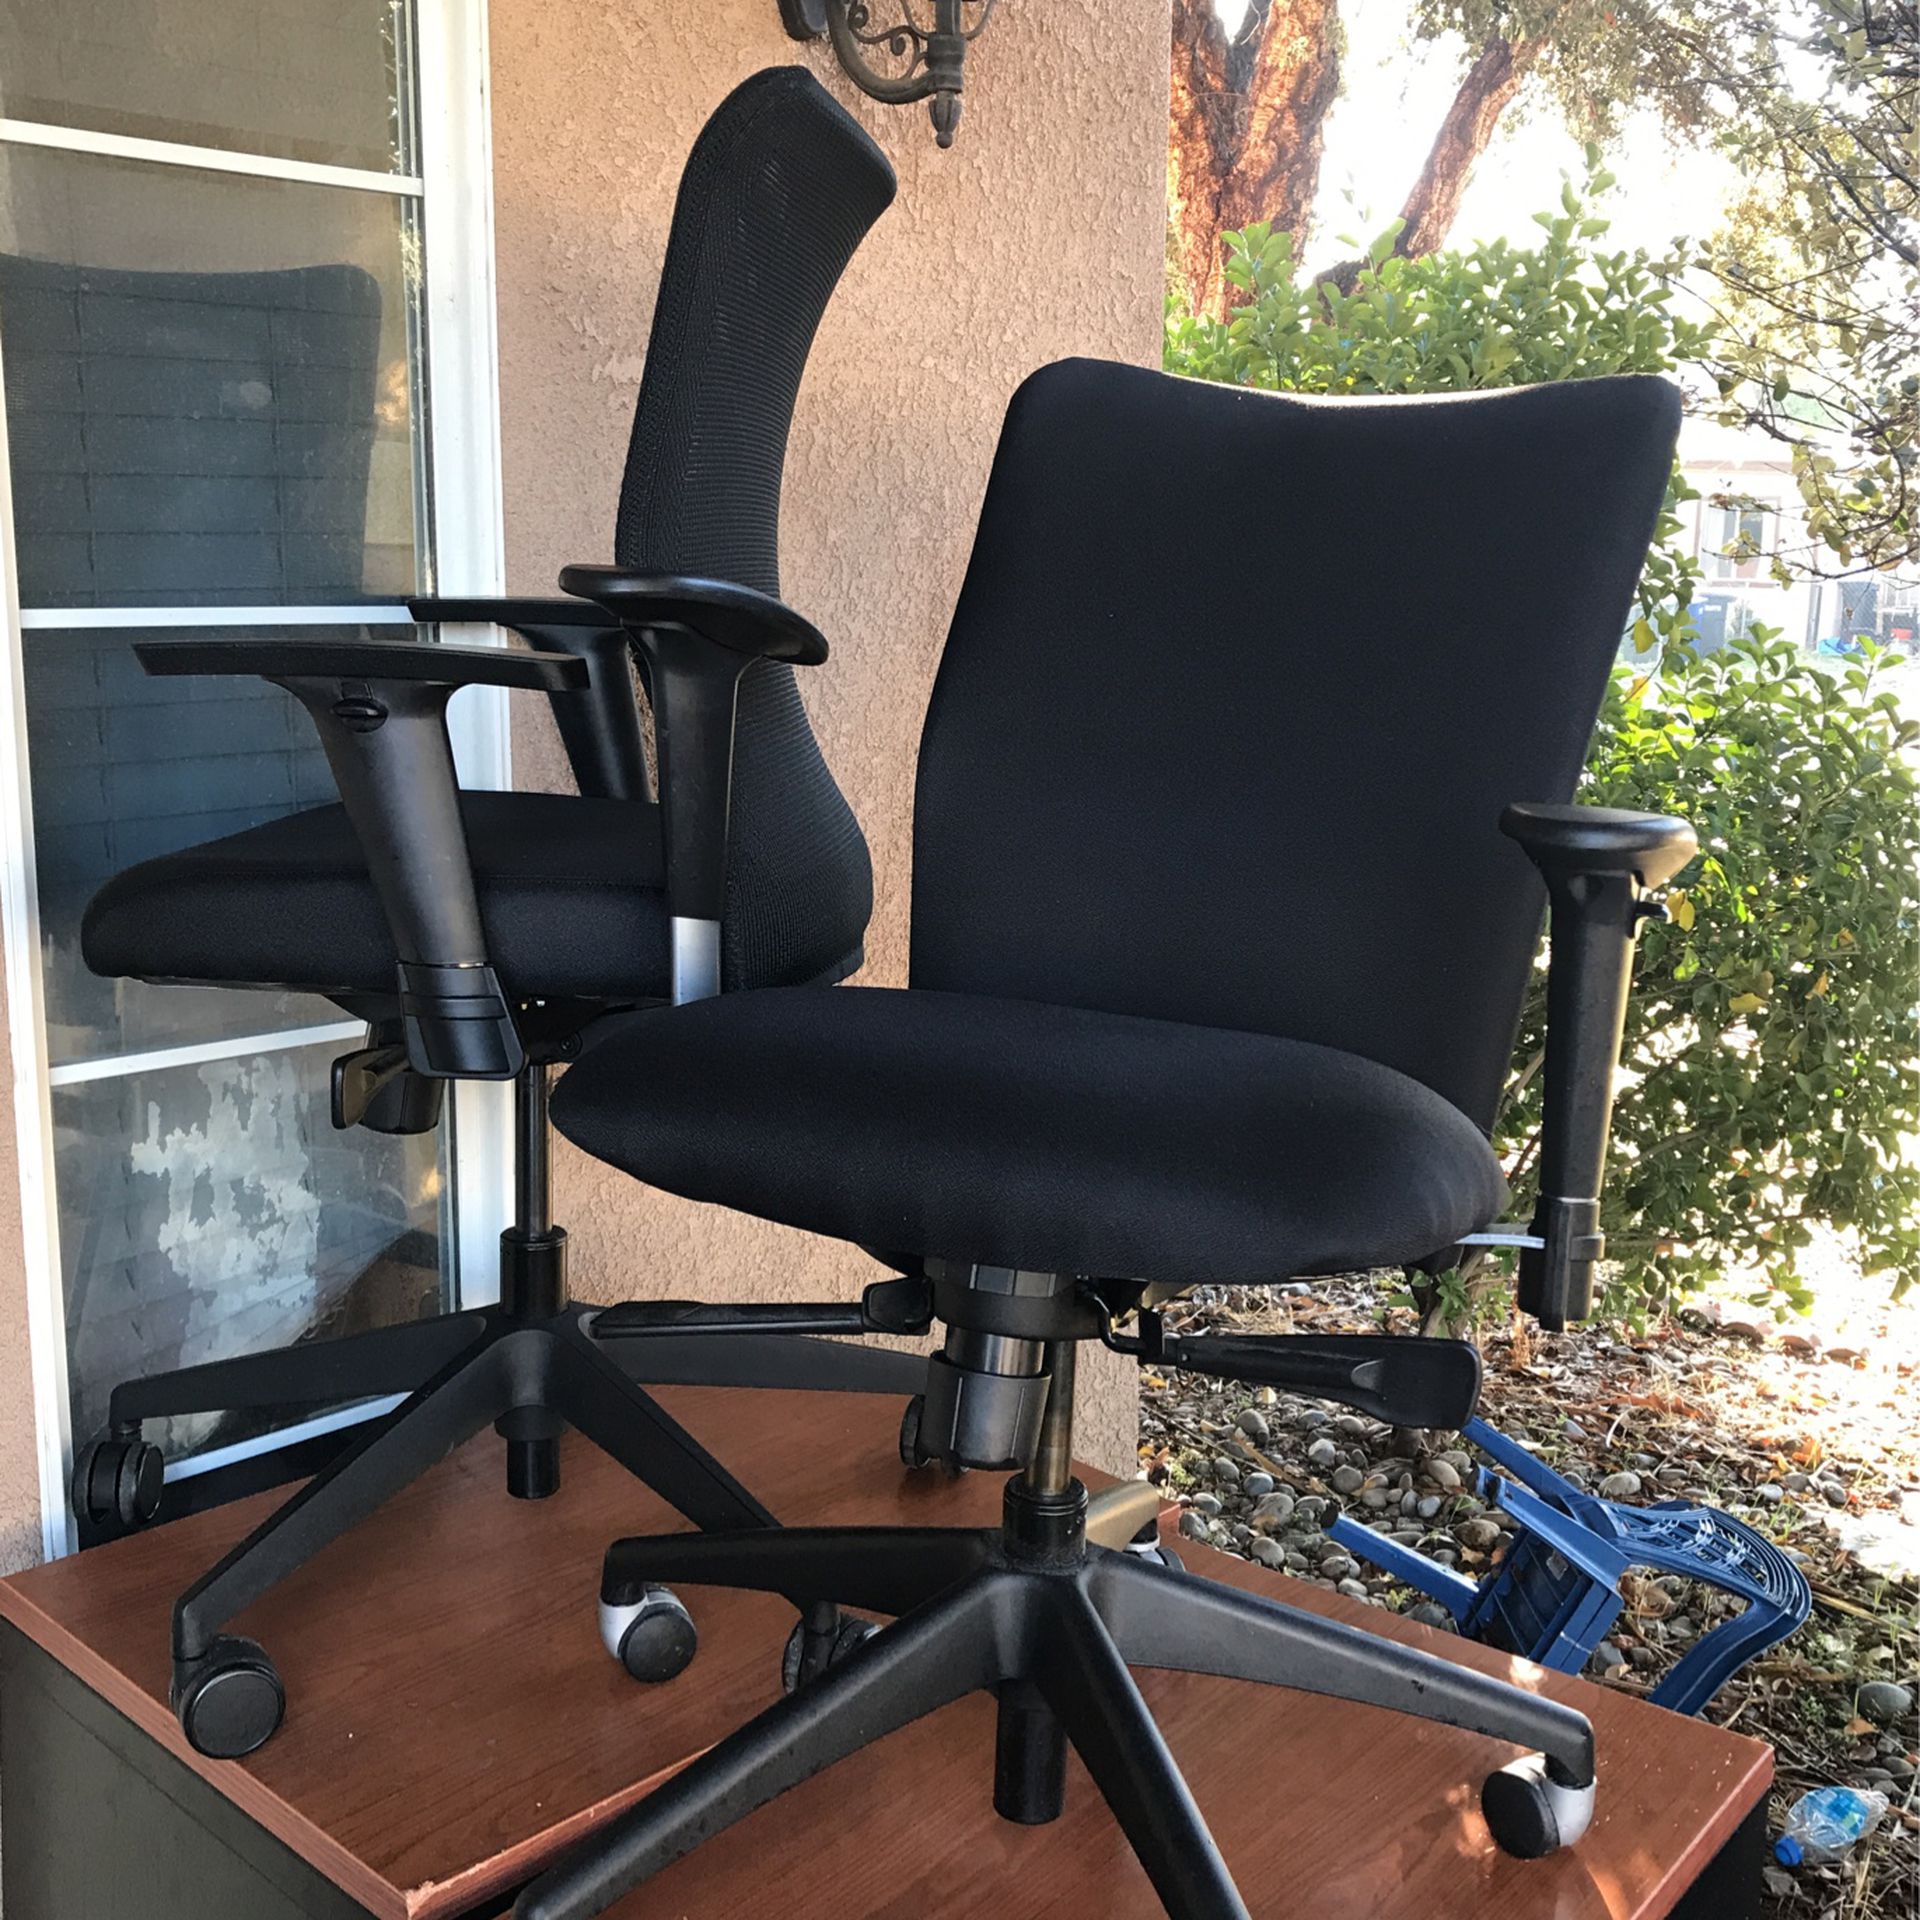 OFFICE CHAIR  USED IN GOOD CONDITION $40.00 EACH ONE